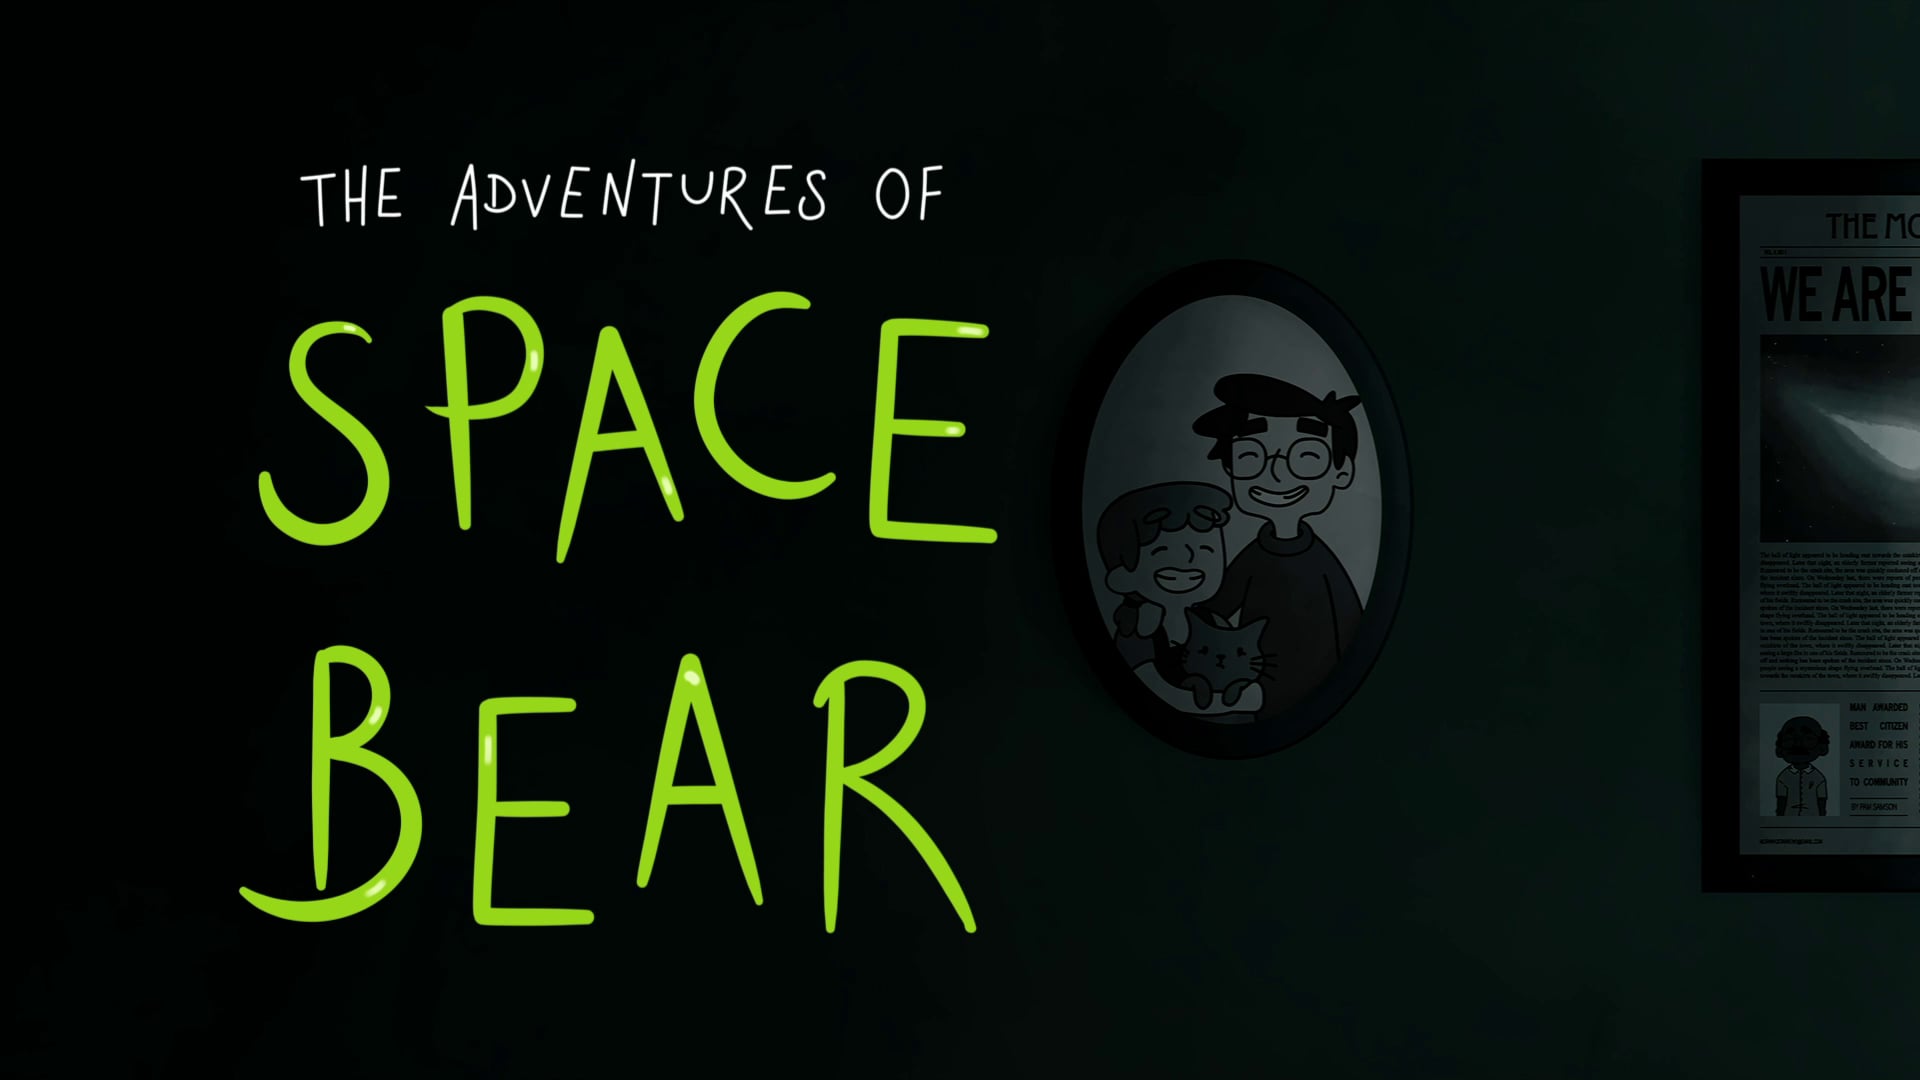 The Adventures of Space Bear - title card